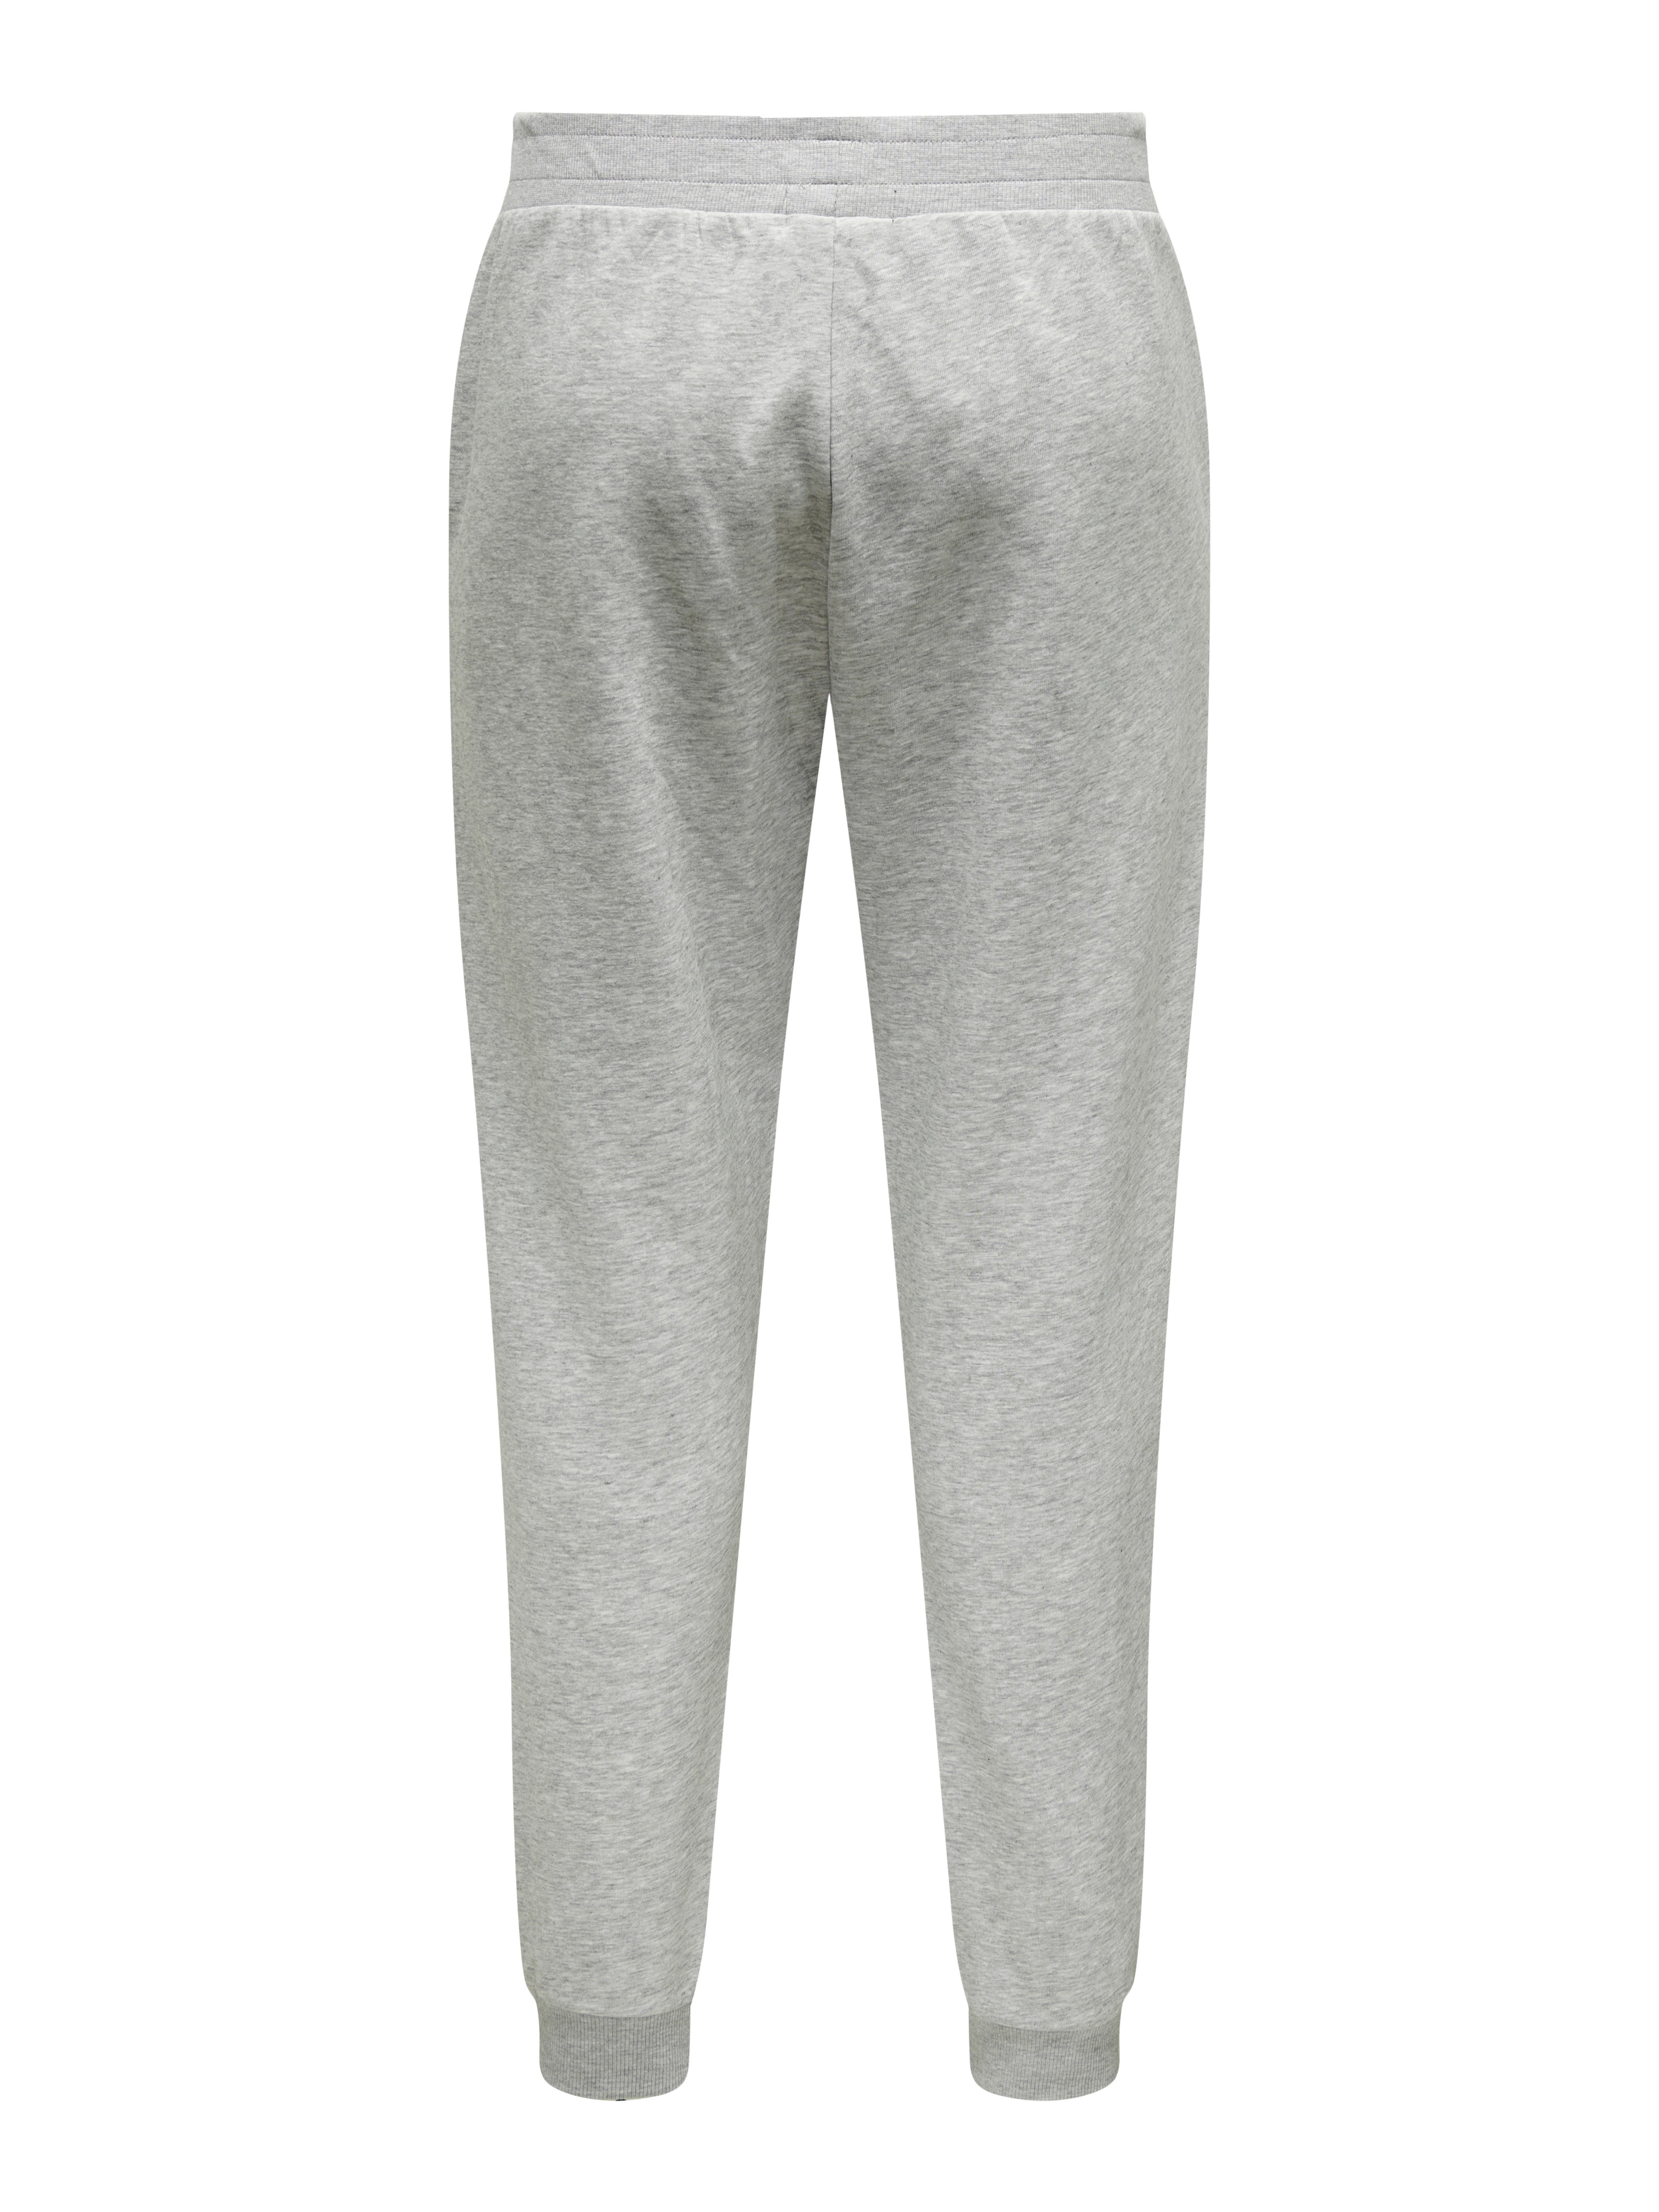 Everlast sweatpants White Size XS - $12 (60% Off Retail) - From kenz